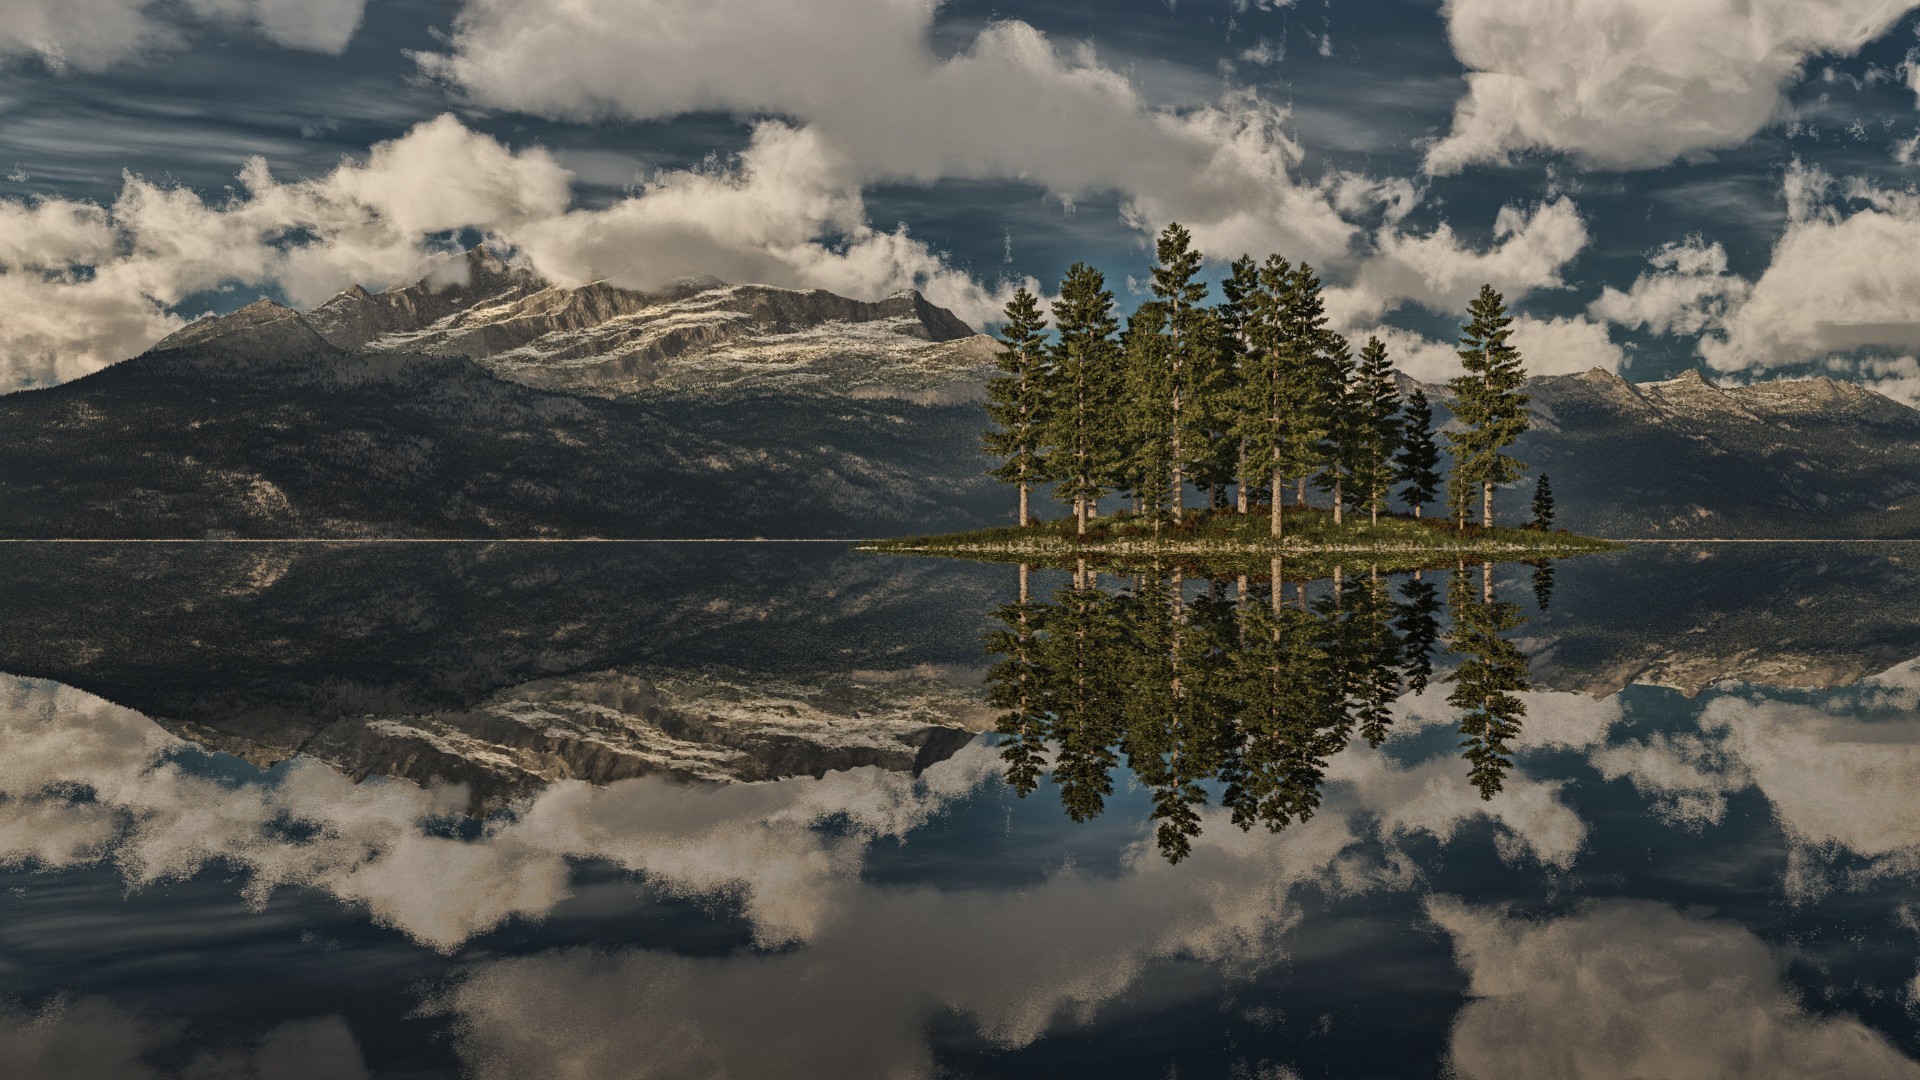 General 1920x1080 nature landscape lake reflection clouds trees forest water horizon digital art mountains snowy peak island grass sky